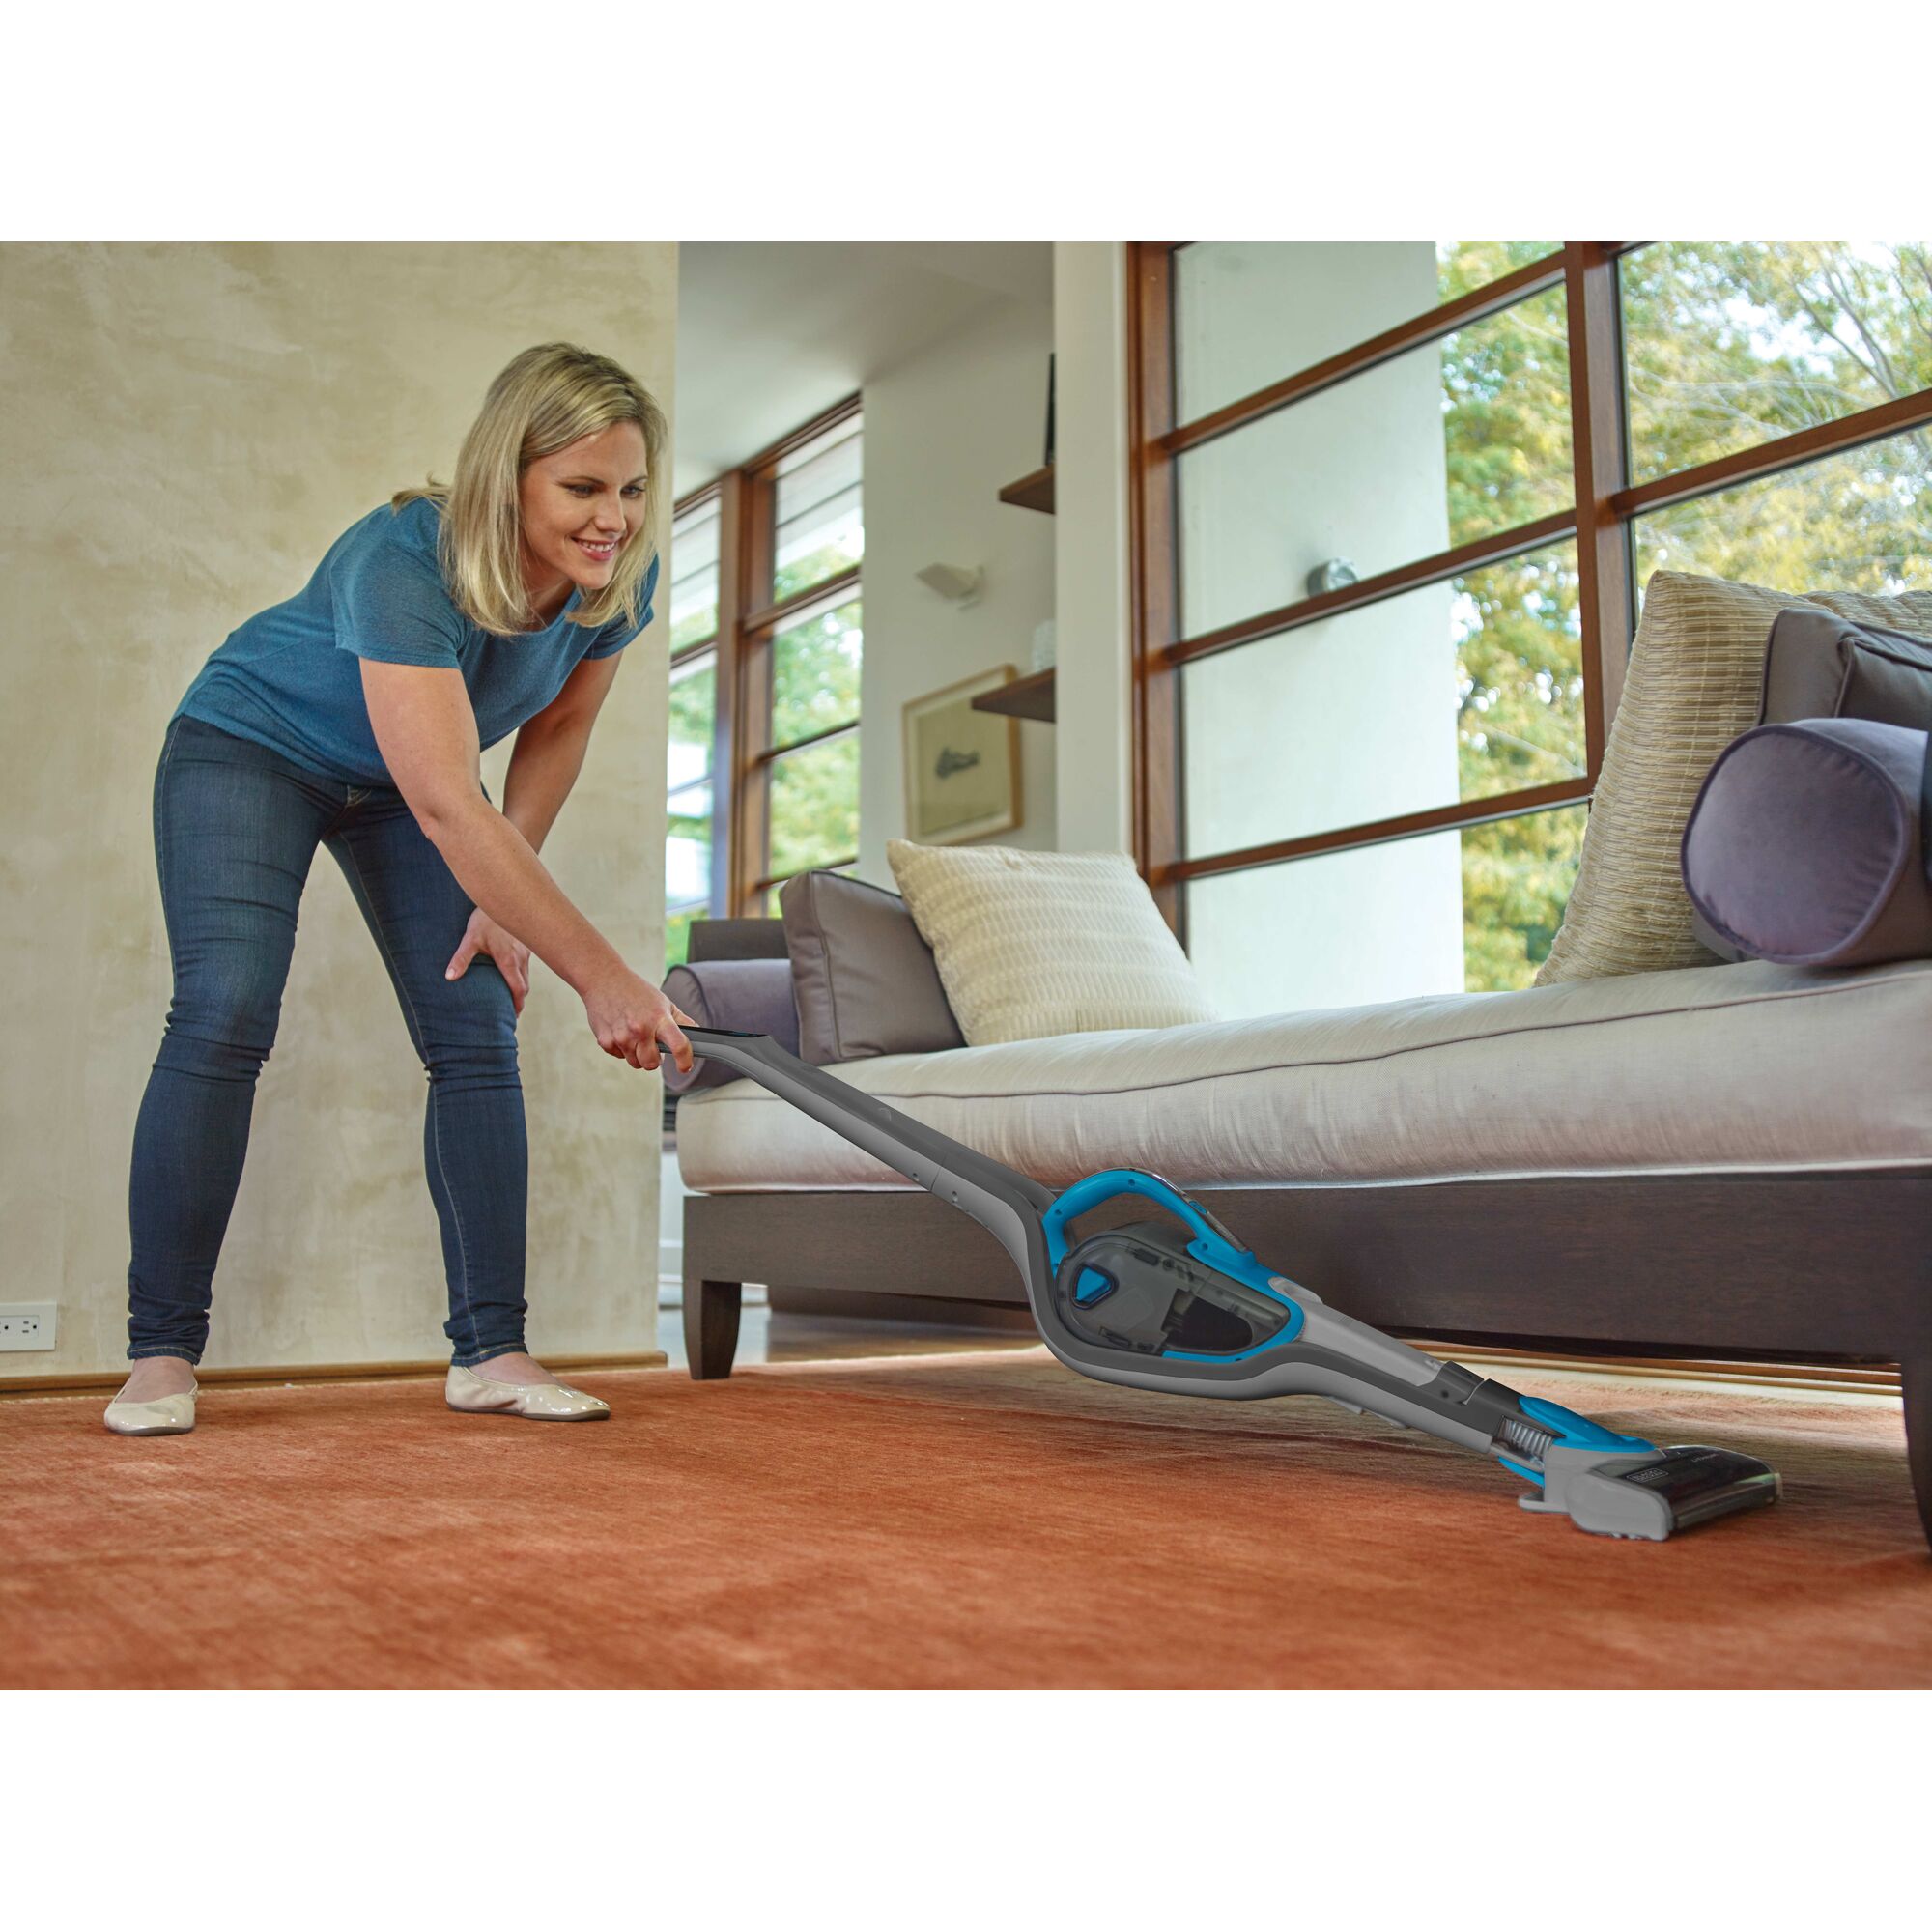 Cordless Lithium 2 in 1 Stick Vacuum being used for cleaning under sofa.